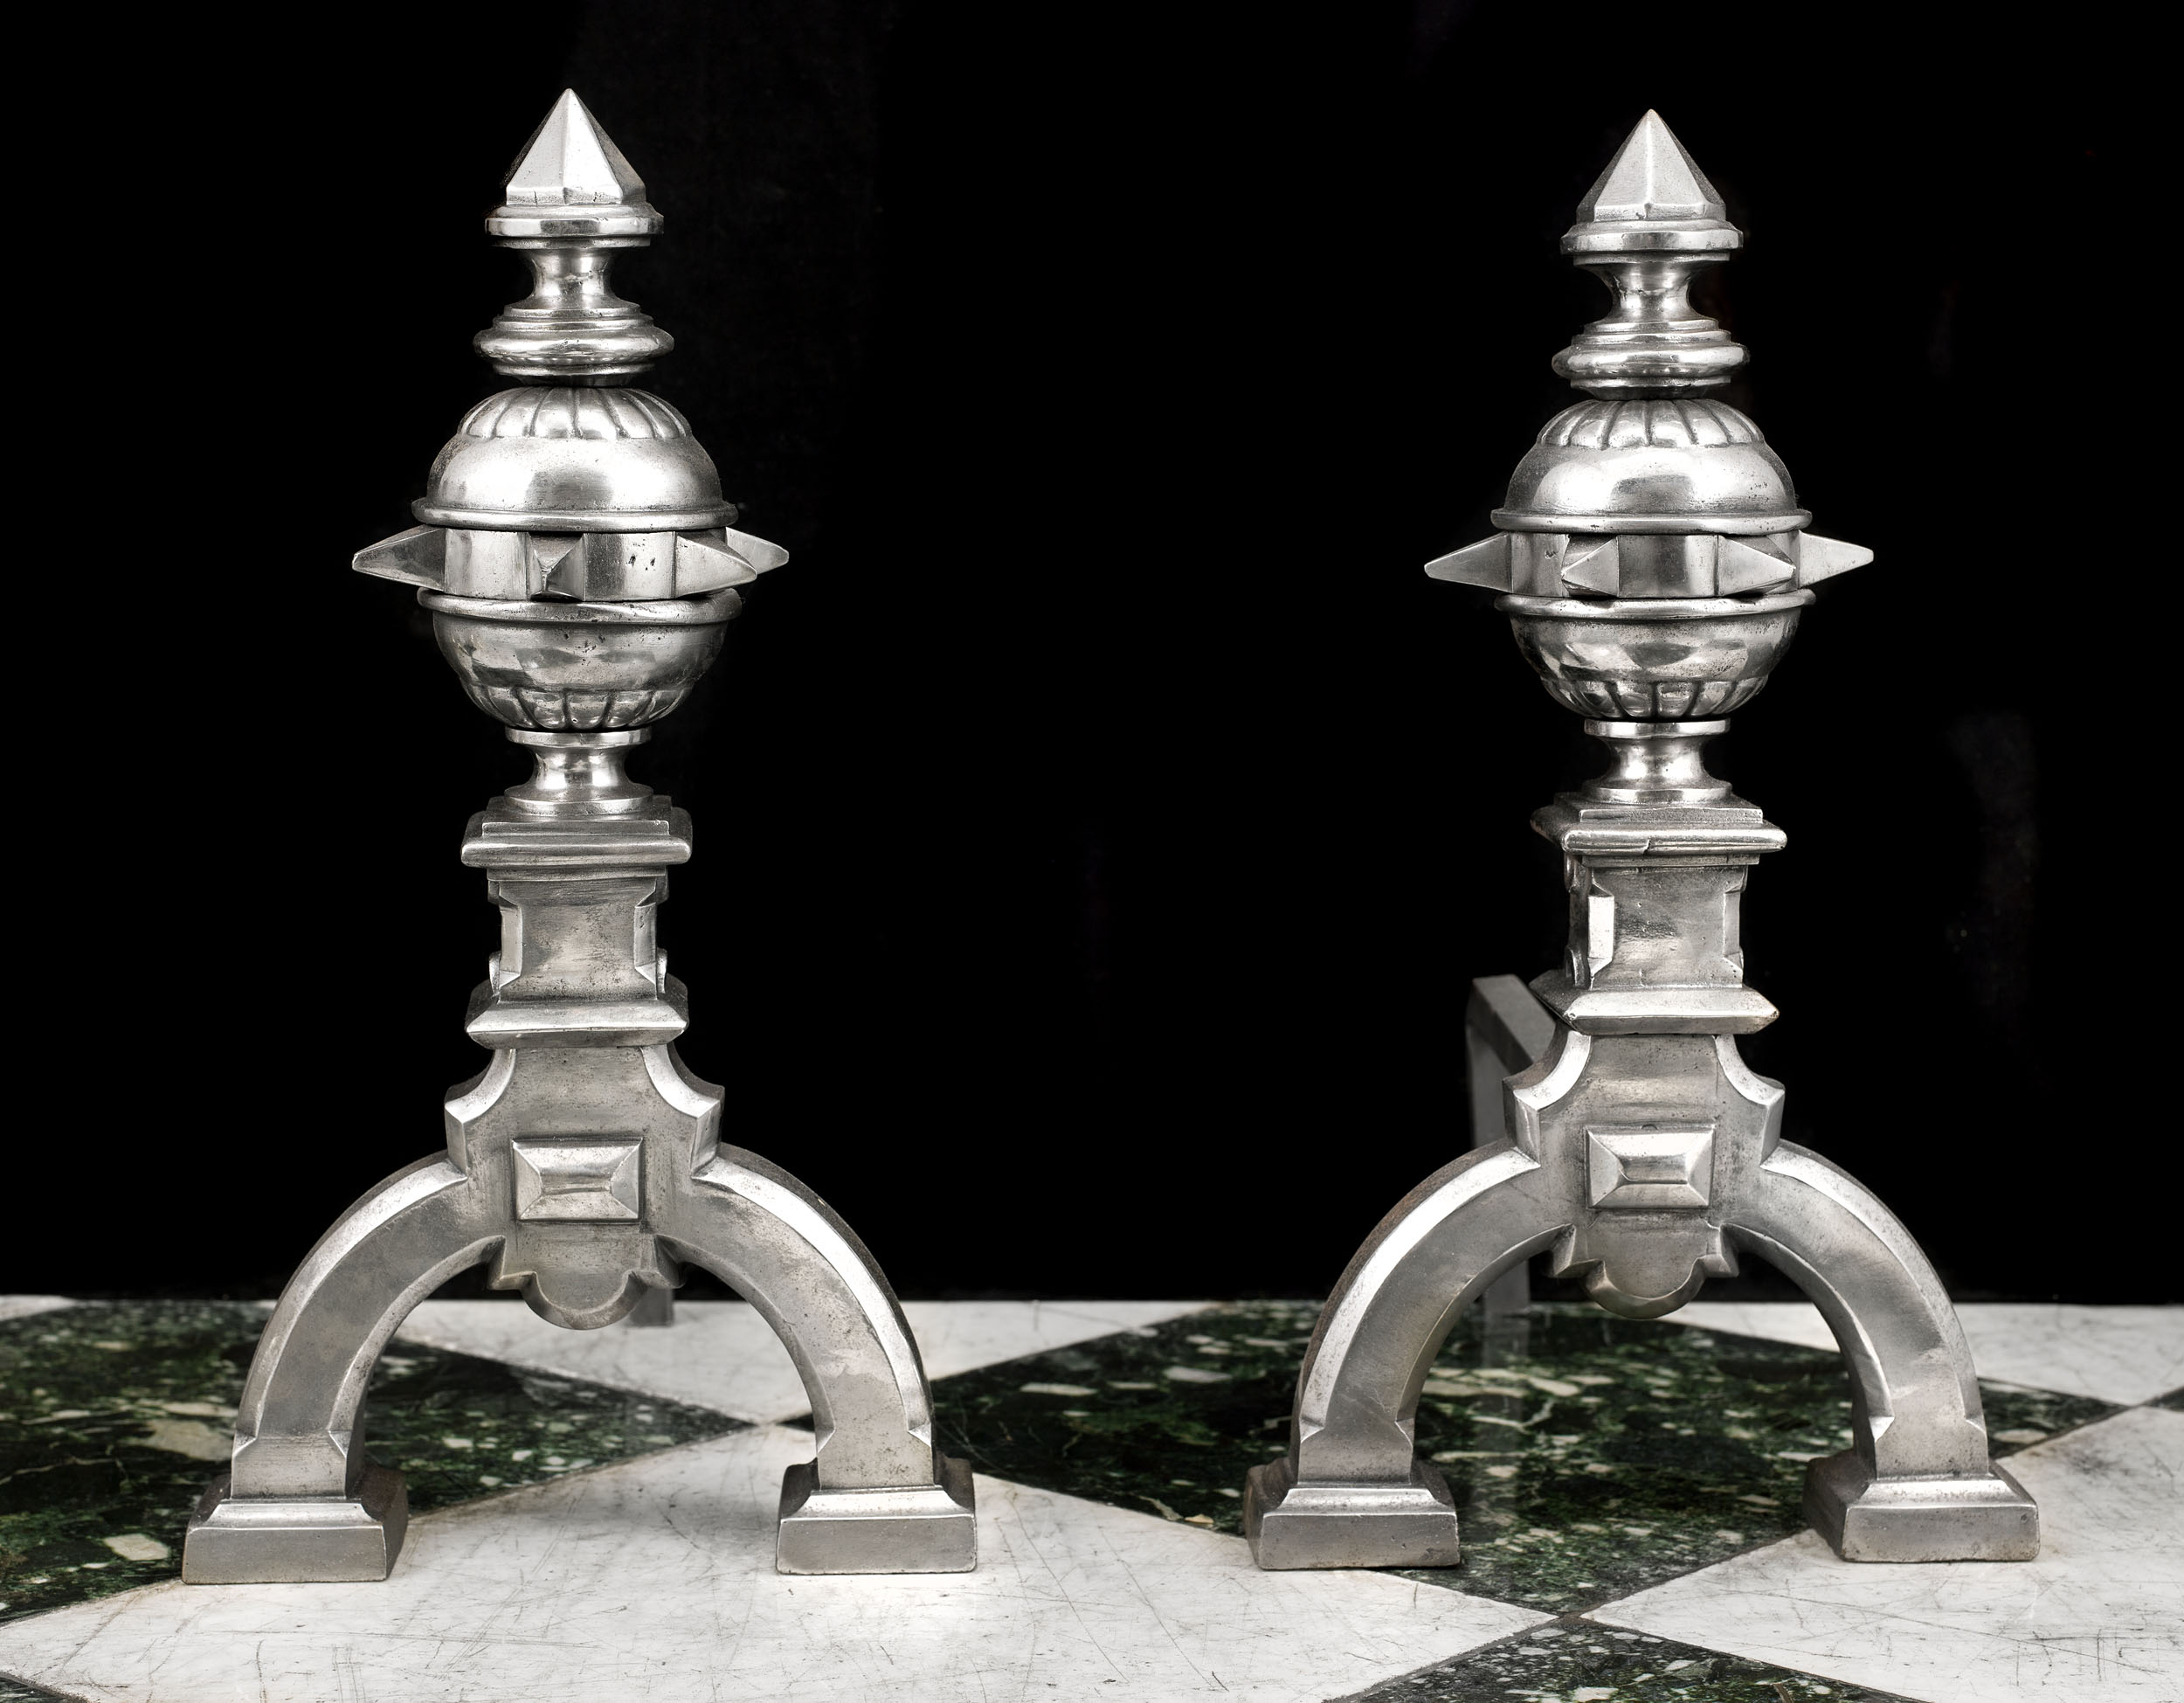  Antique Pair of Polished Steel Andirons